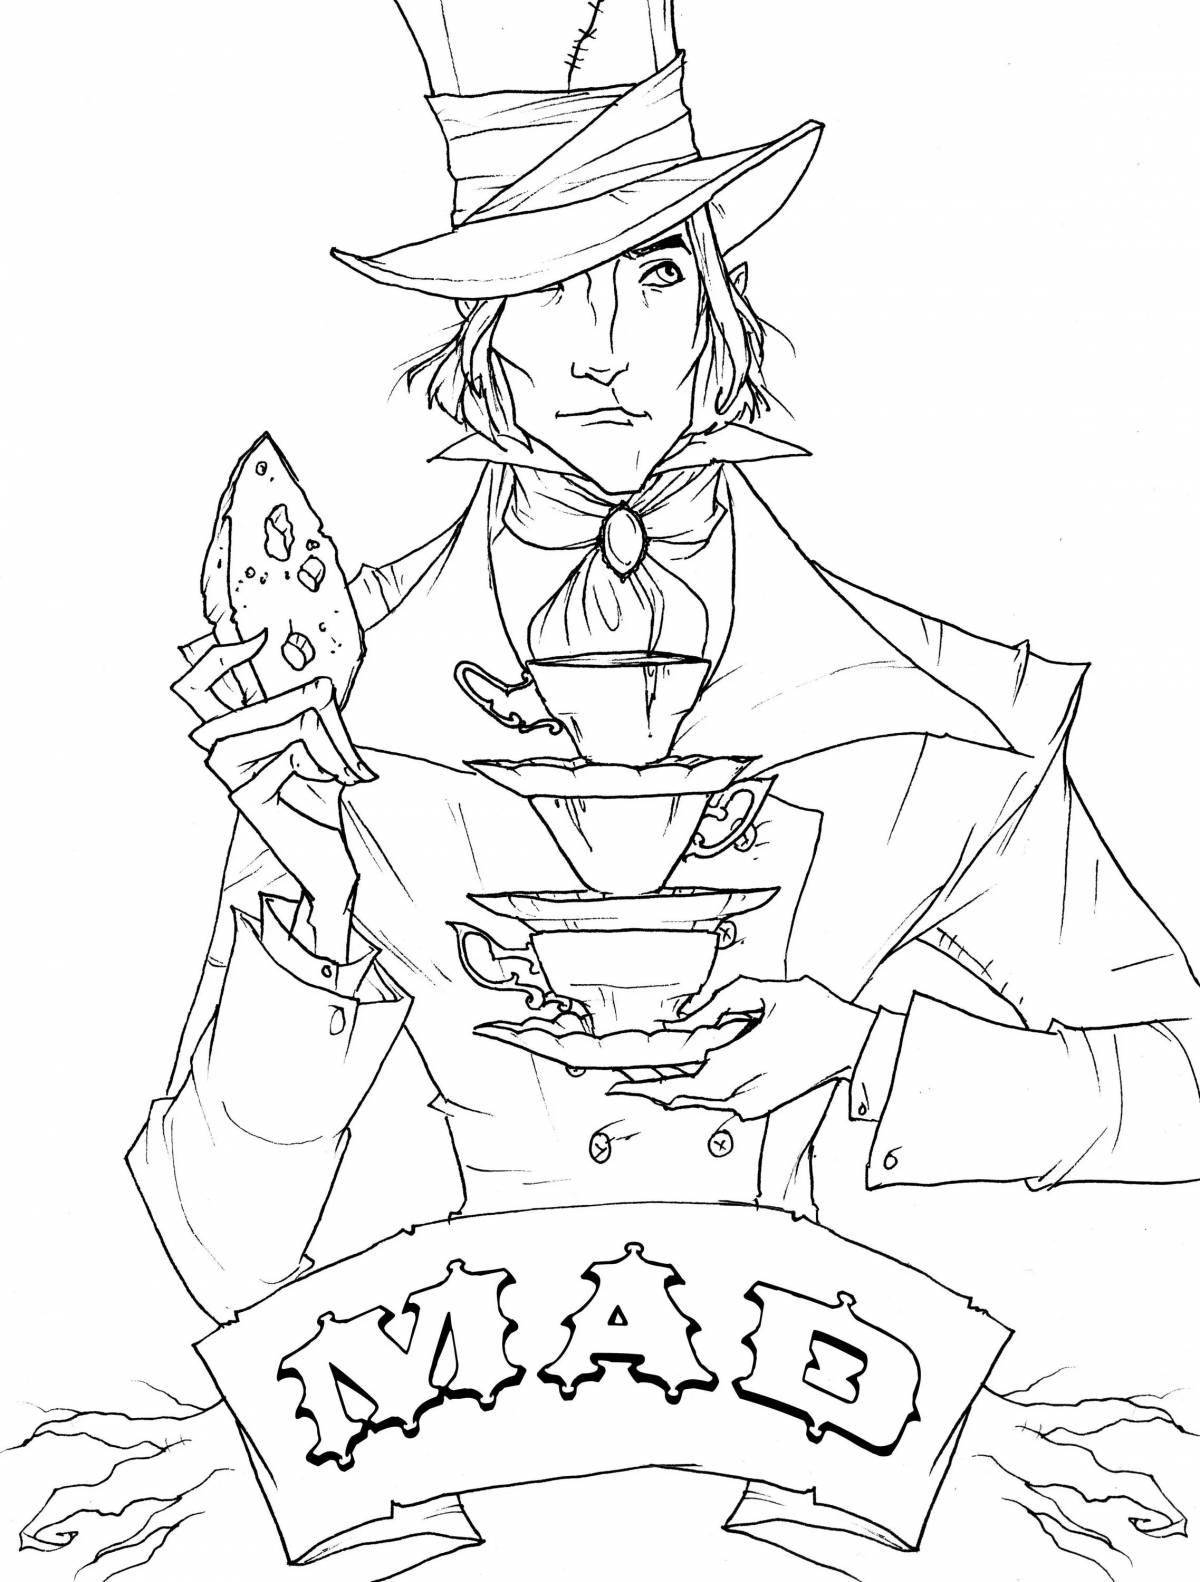 Coloring the amazing hatter